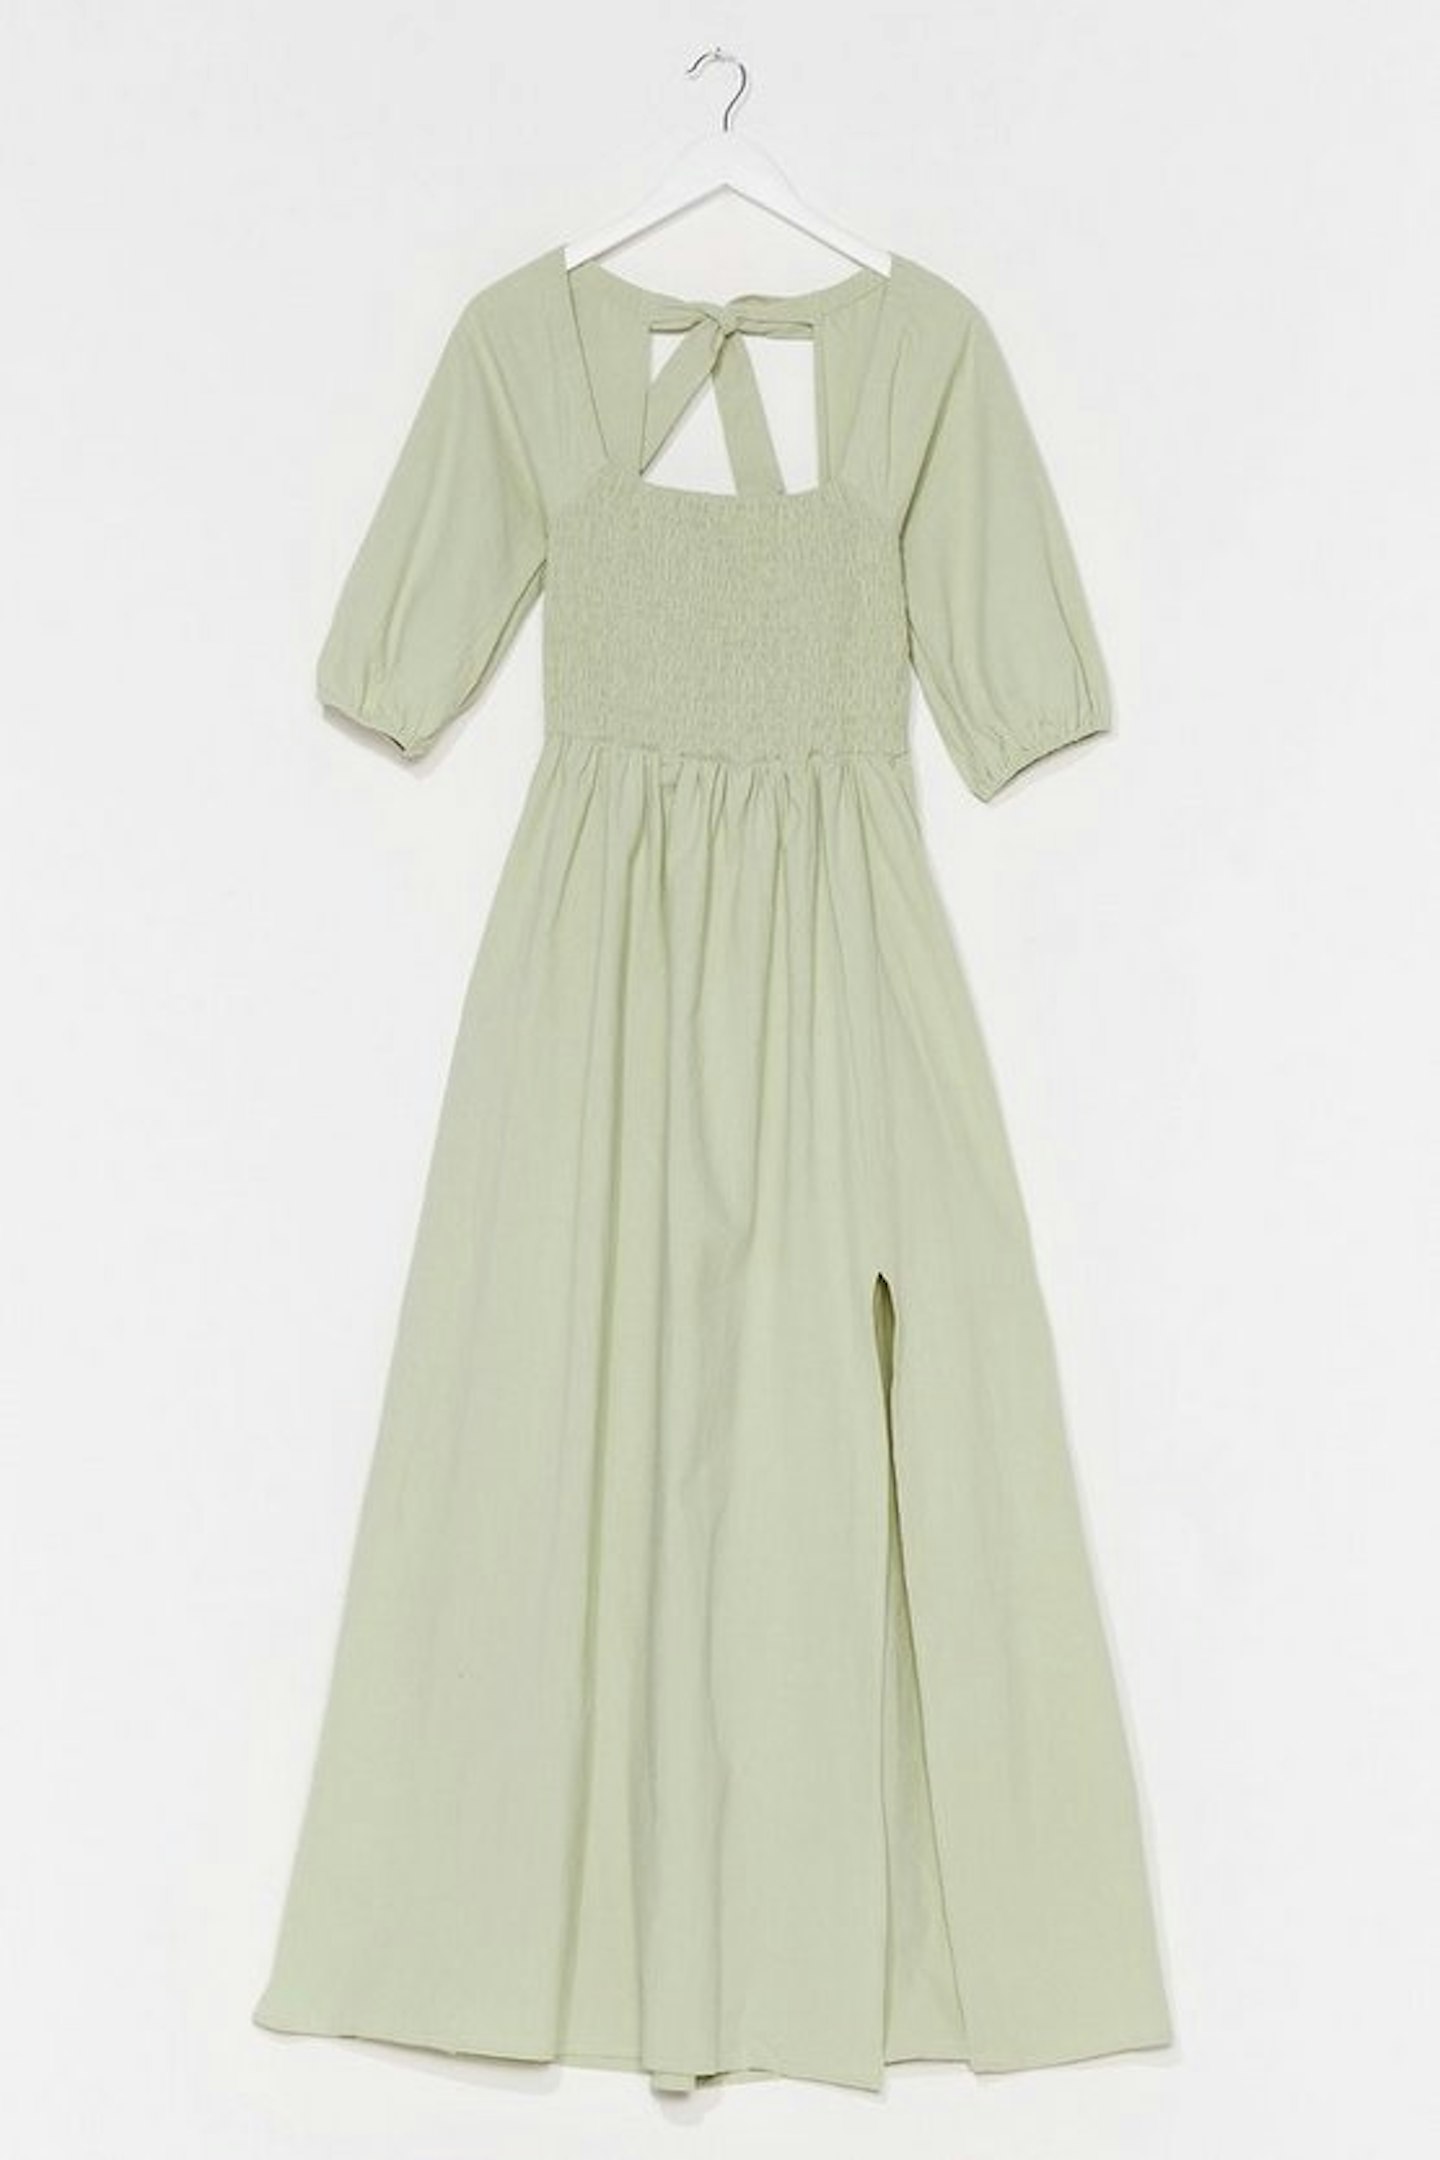 Nasty Gal, We Be-sleeve in You Shirred Maxi Dress, £21